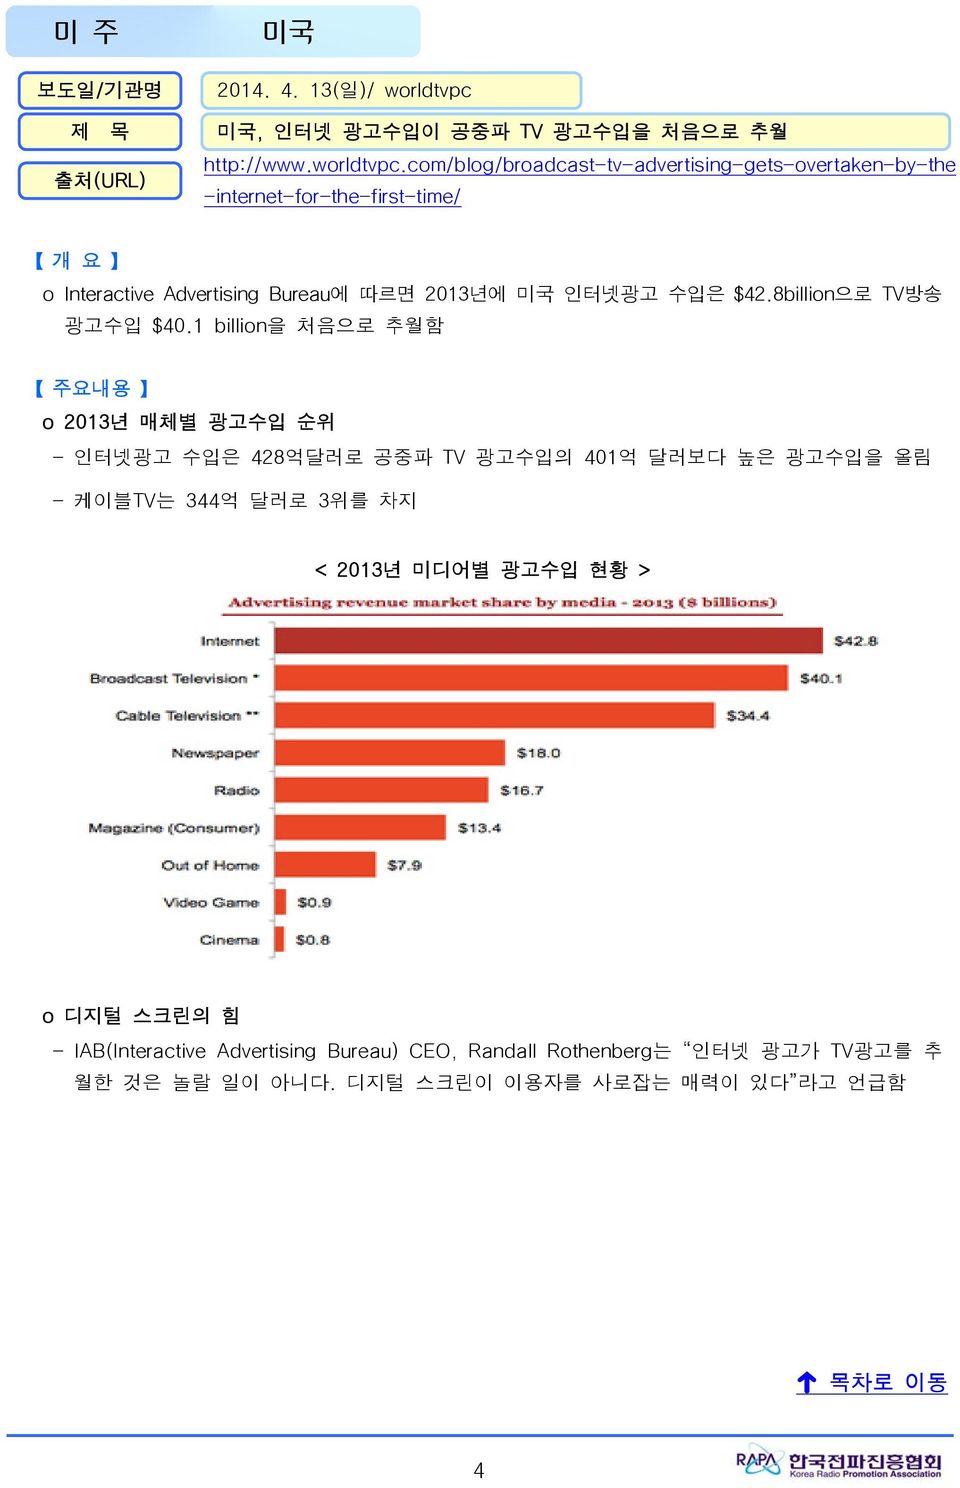 com/blog/broadcast-tv-advertising-gets-overtaken-by-the -internet-for-the-first-time/ 개 요 o Interactive Advertising Bureau에 따르면 2013년에 미국 인터넷광고